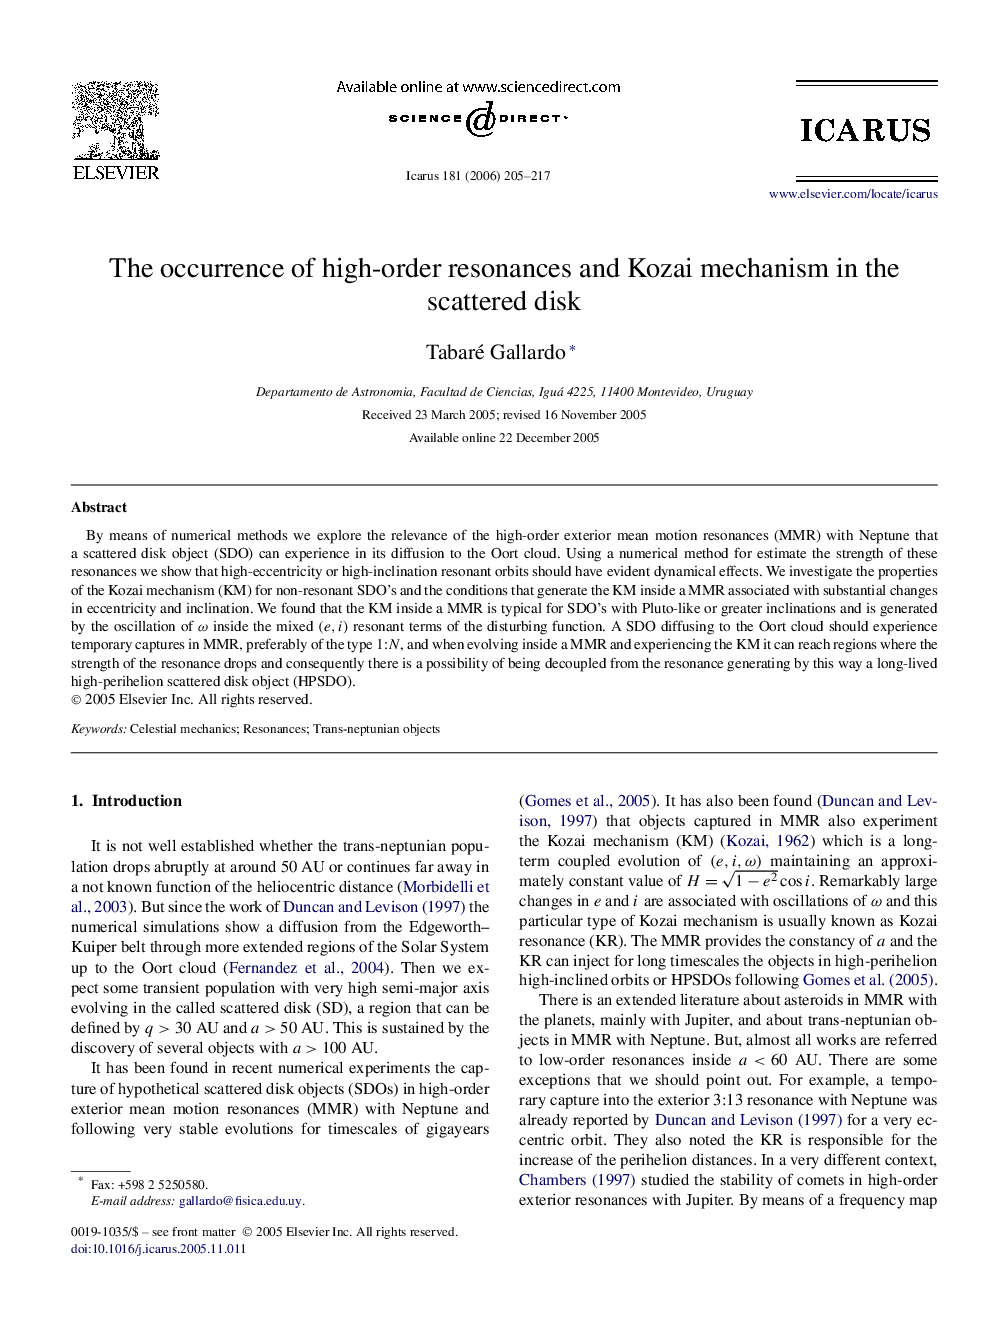 The occurrence of high-order resonances and Kozai mechanism in the scattered disk